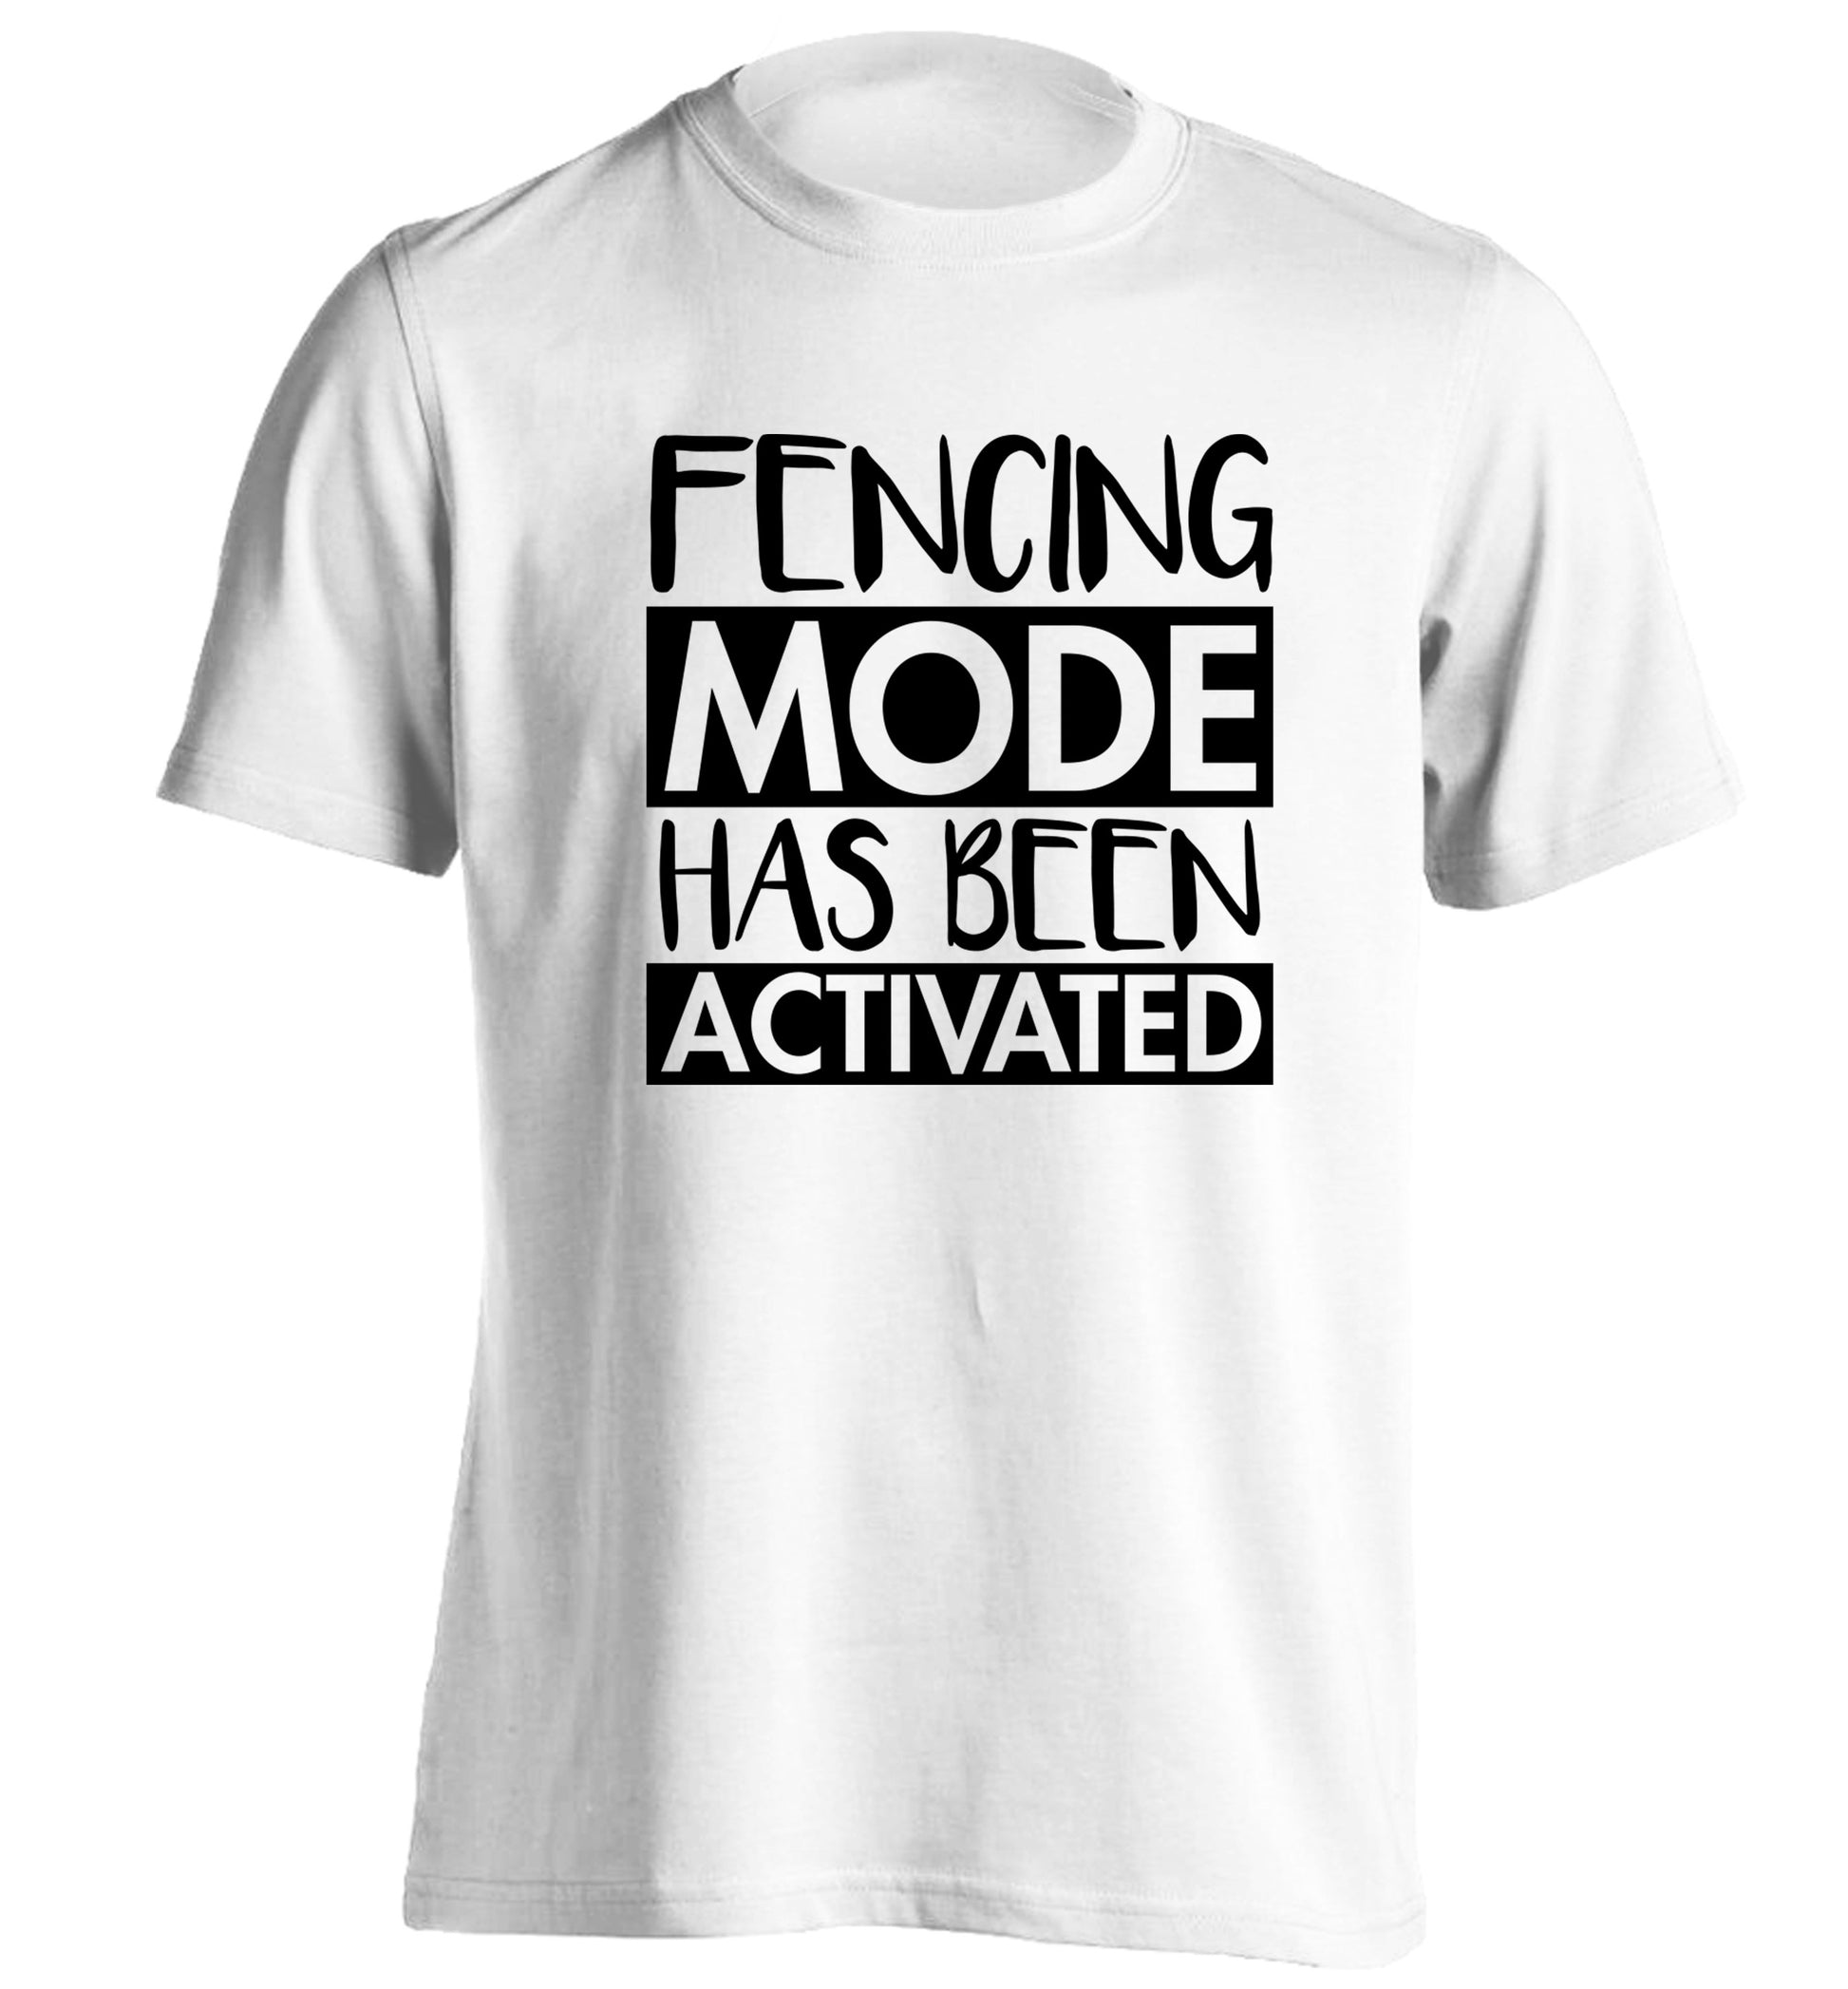 Fencing mode activated adults unisex white Tshirt 2XL